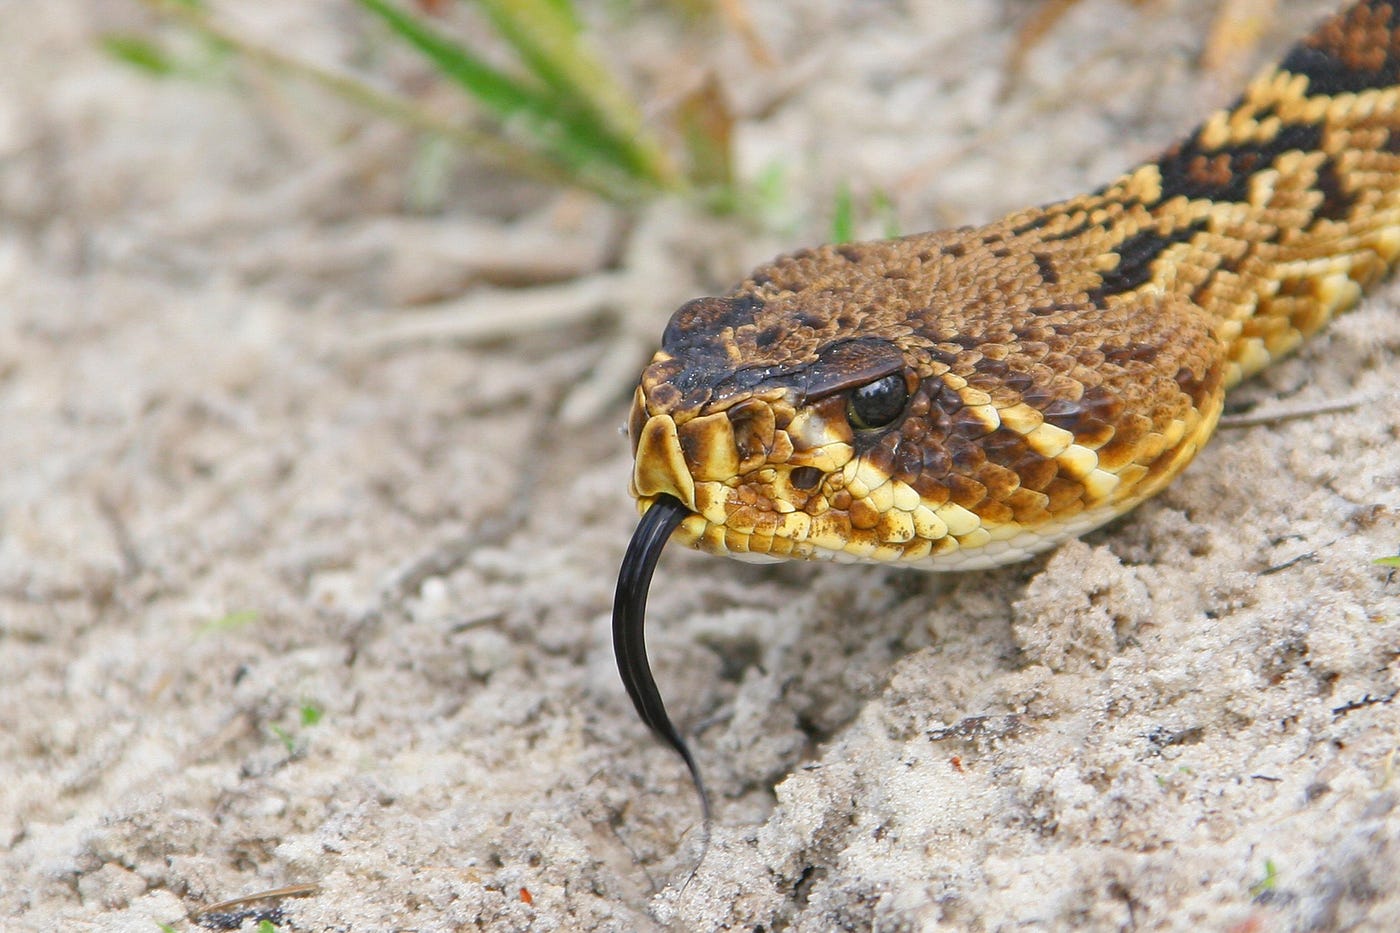 A snake that can spit and play dead - how awesome!